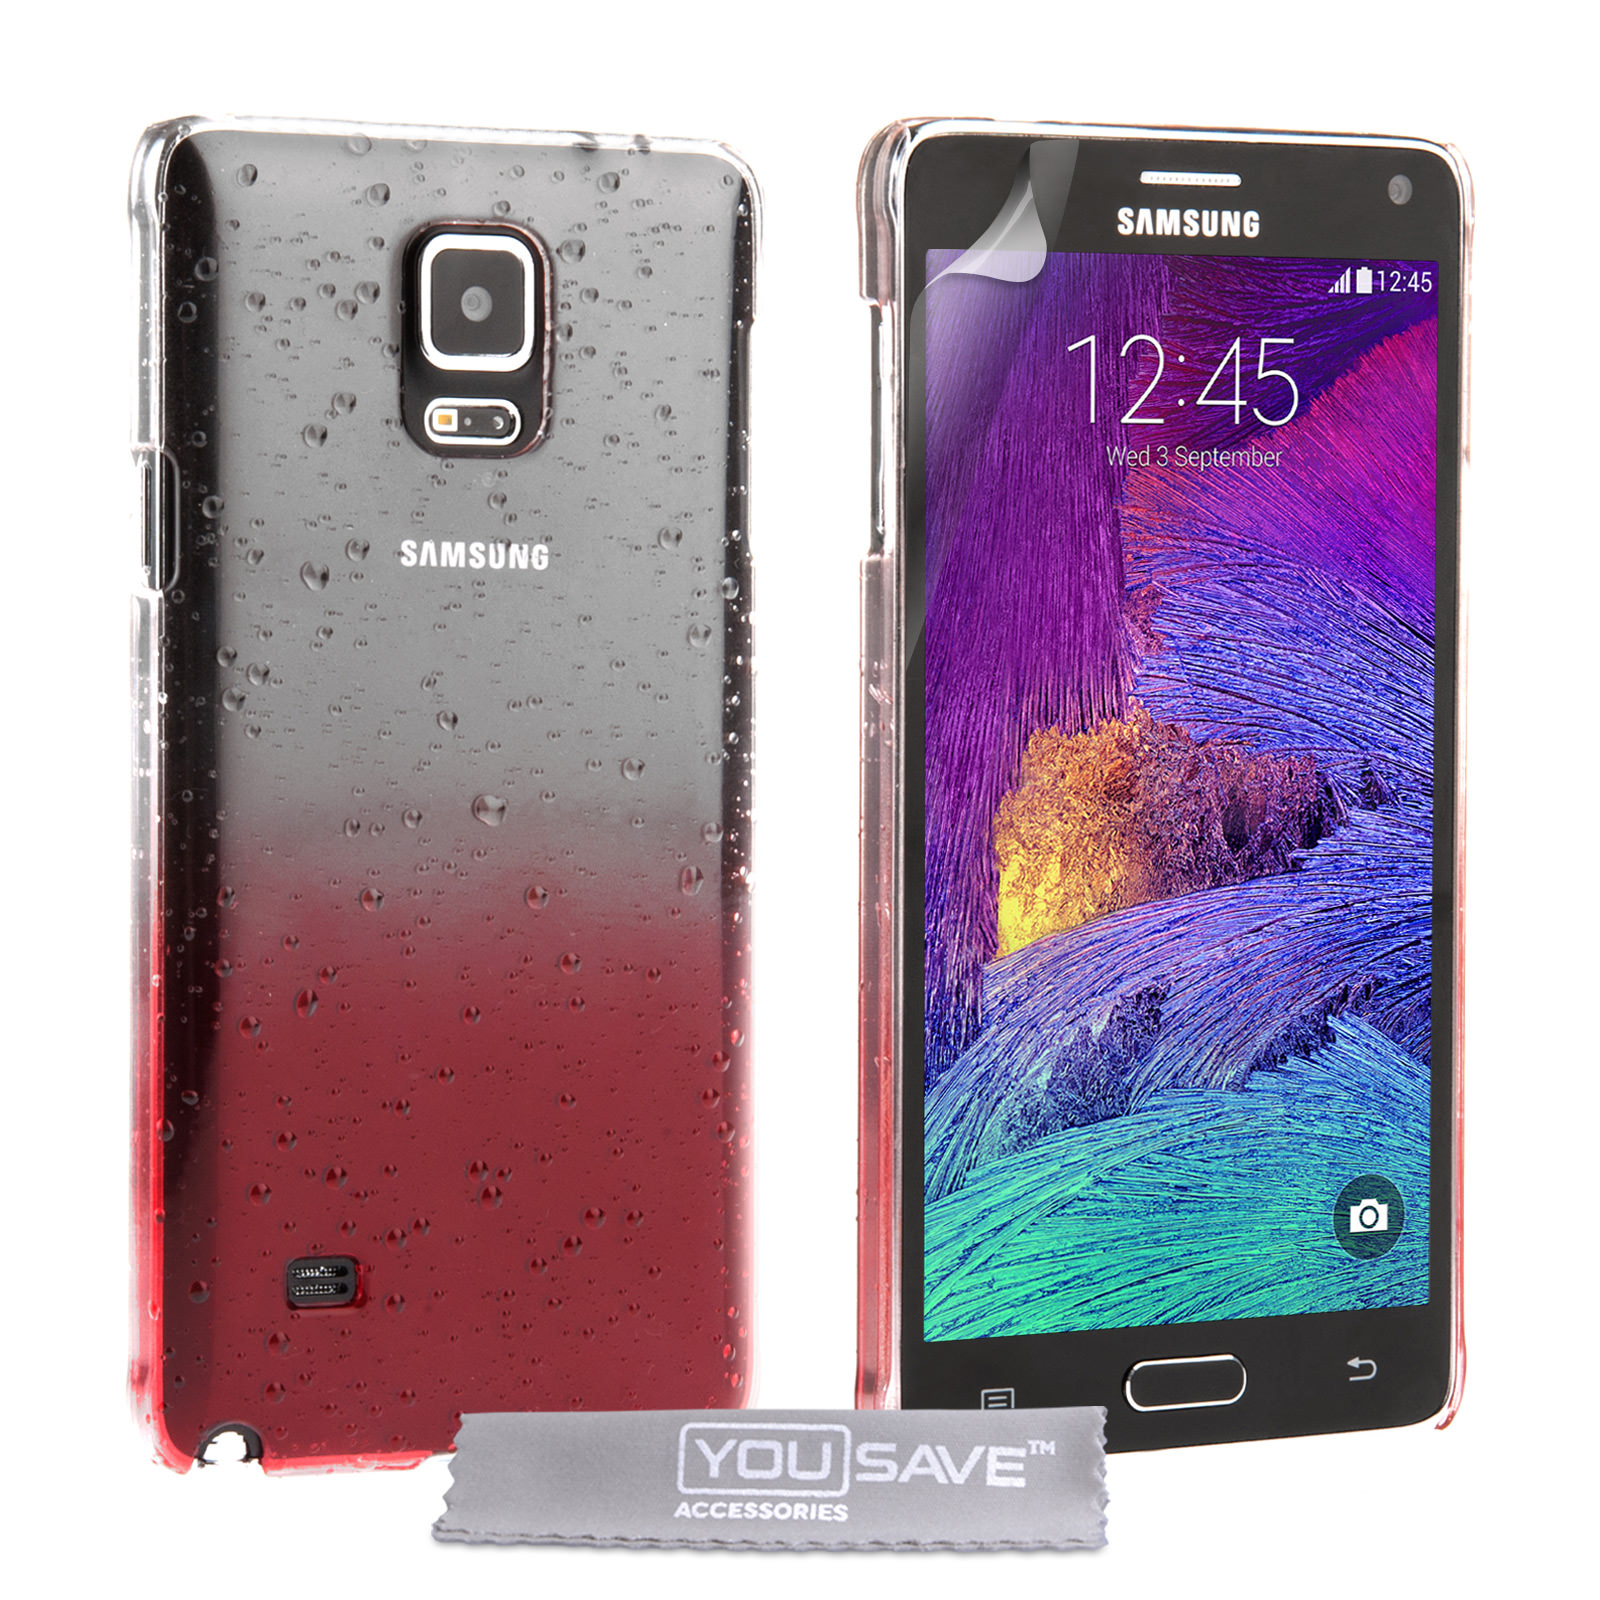 YouSave Samsung Galaxy Note 4 Raindrop Hard Case - Red-Clear